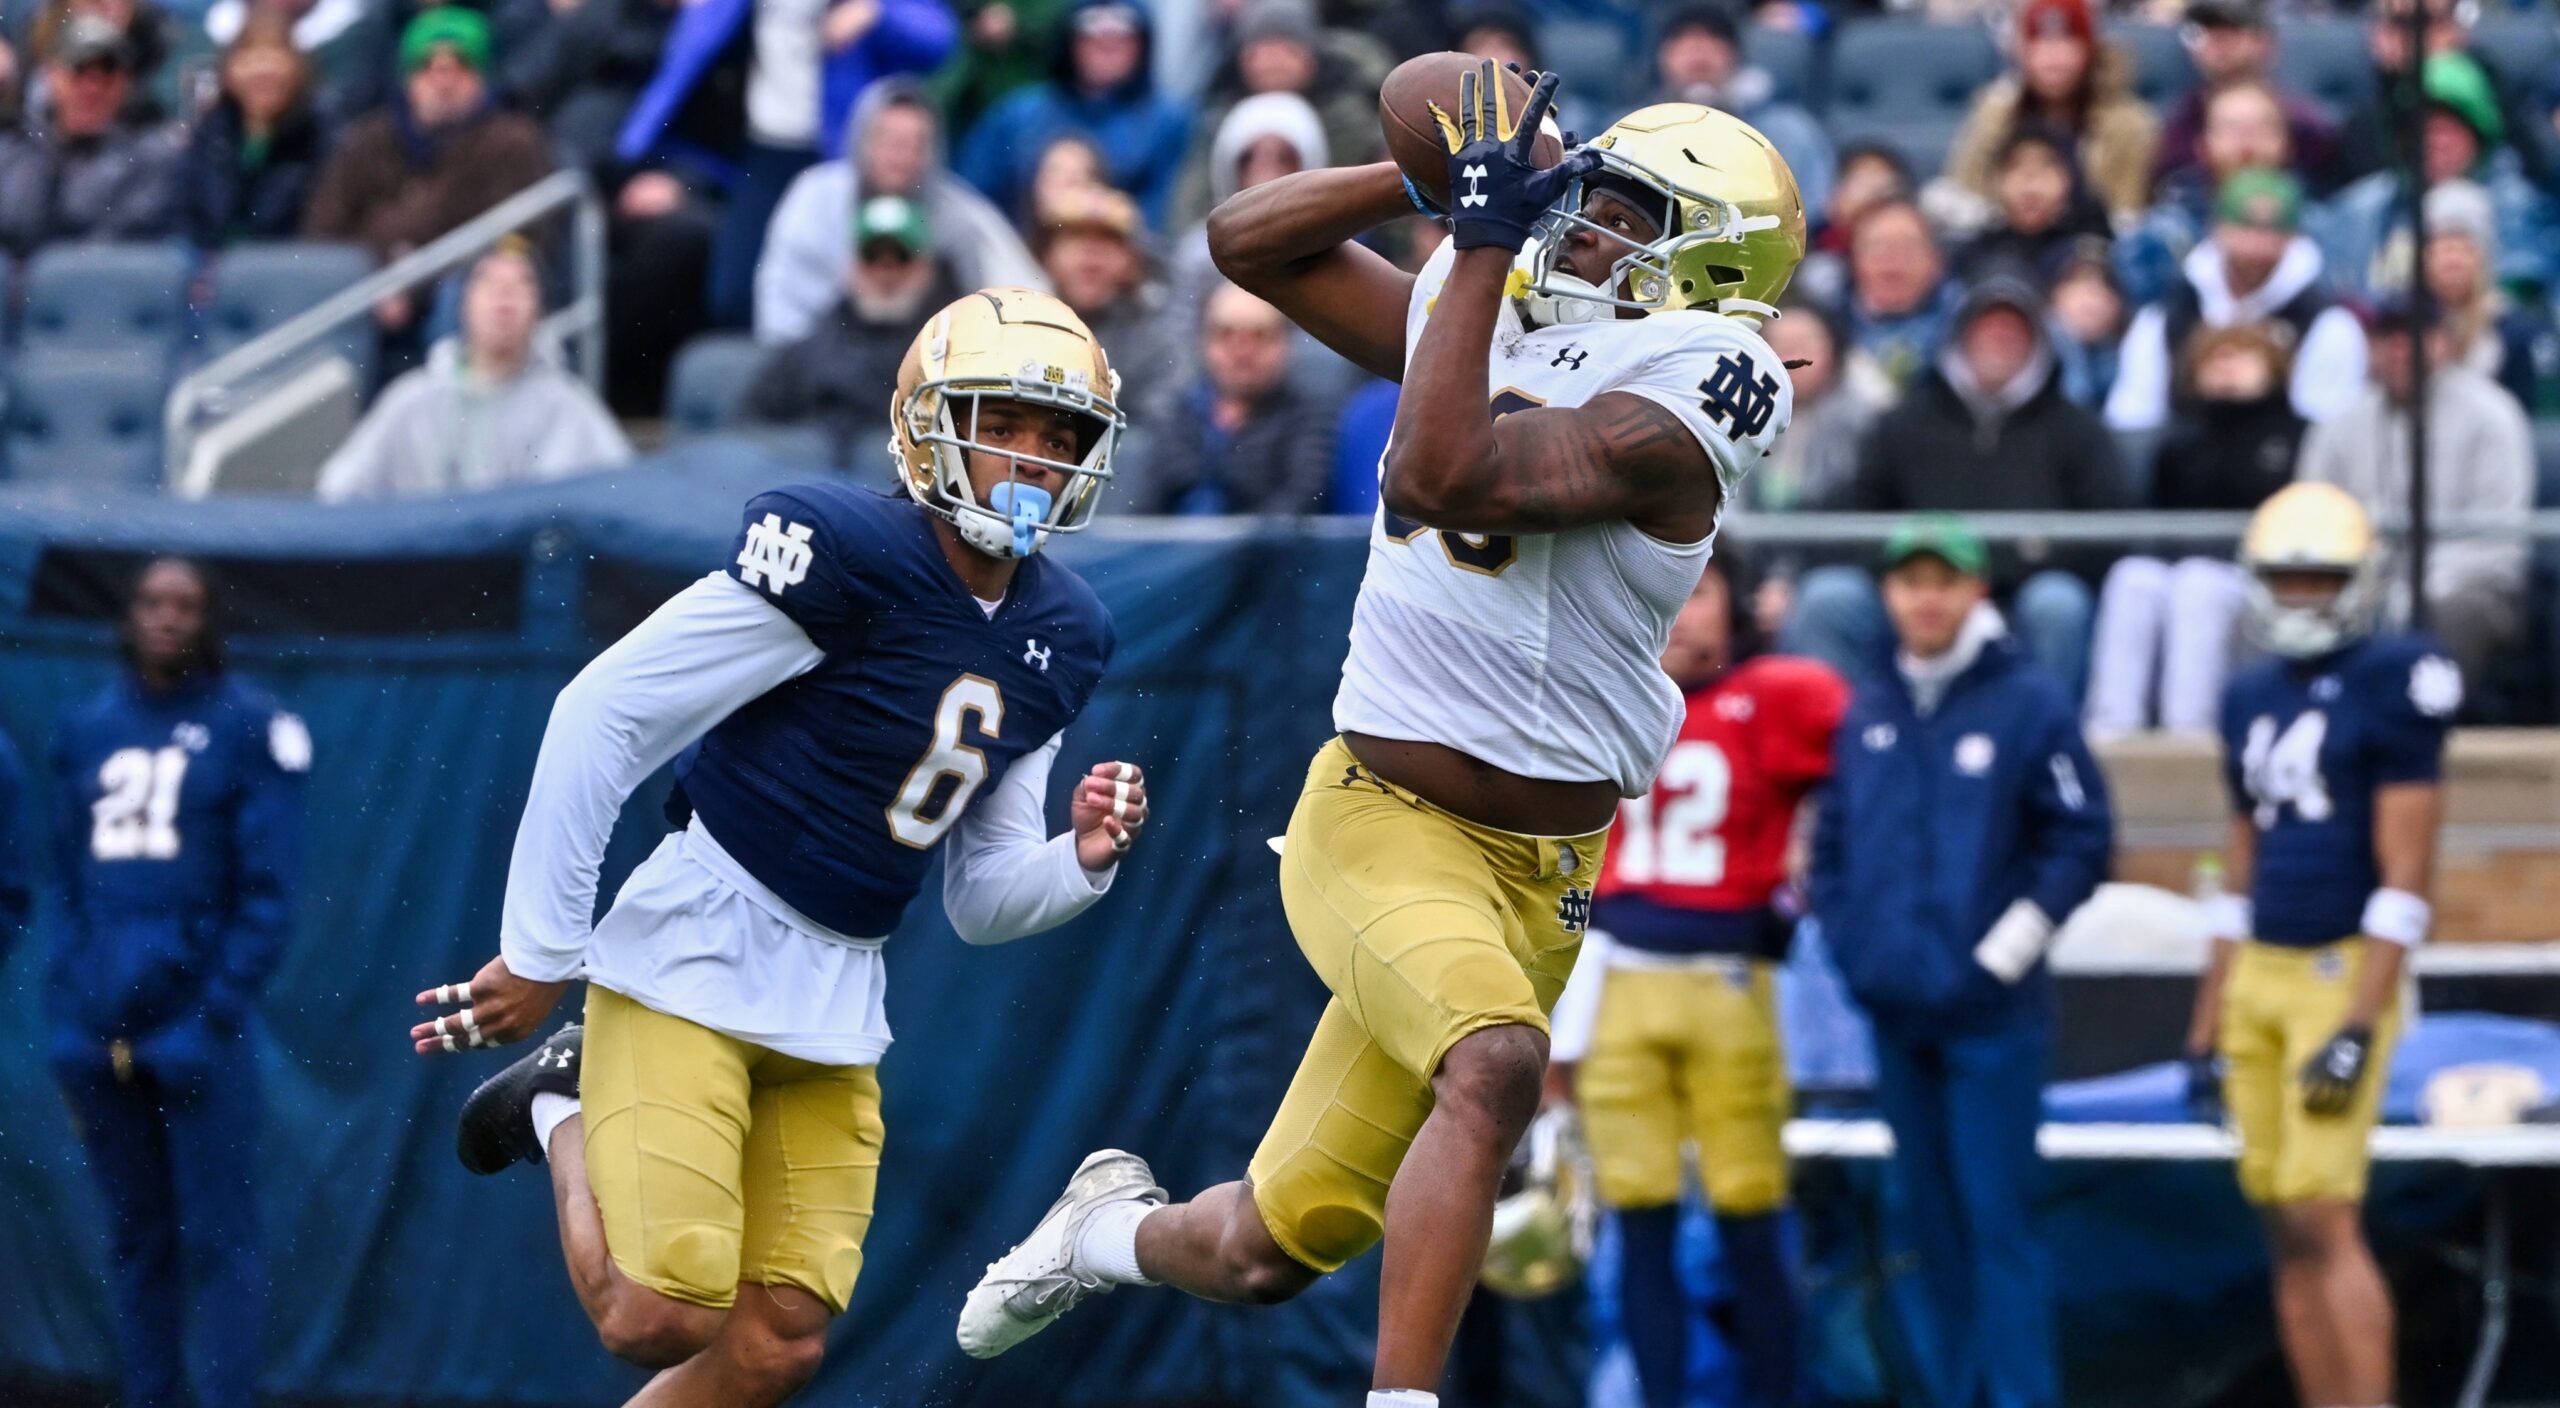 NBC Sports Debuts New Score Bug in Notre Dame Navy Game